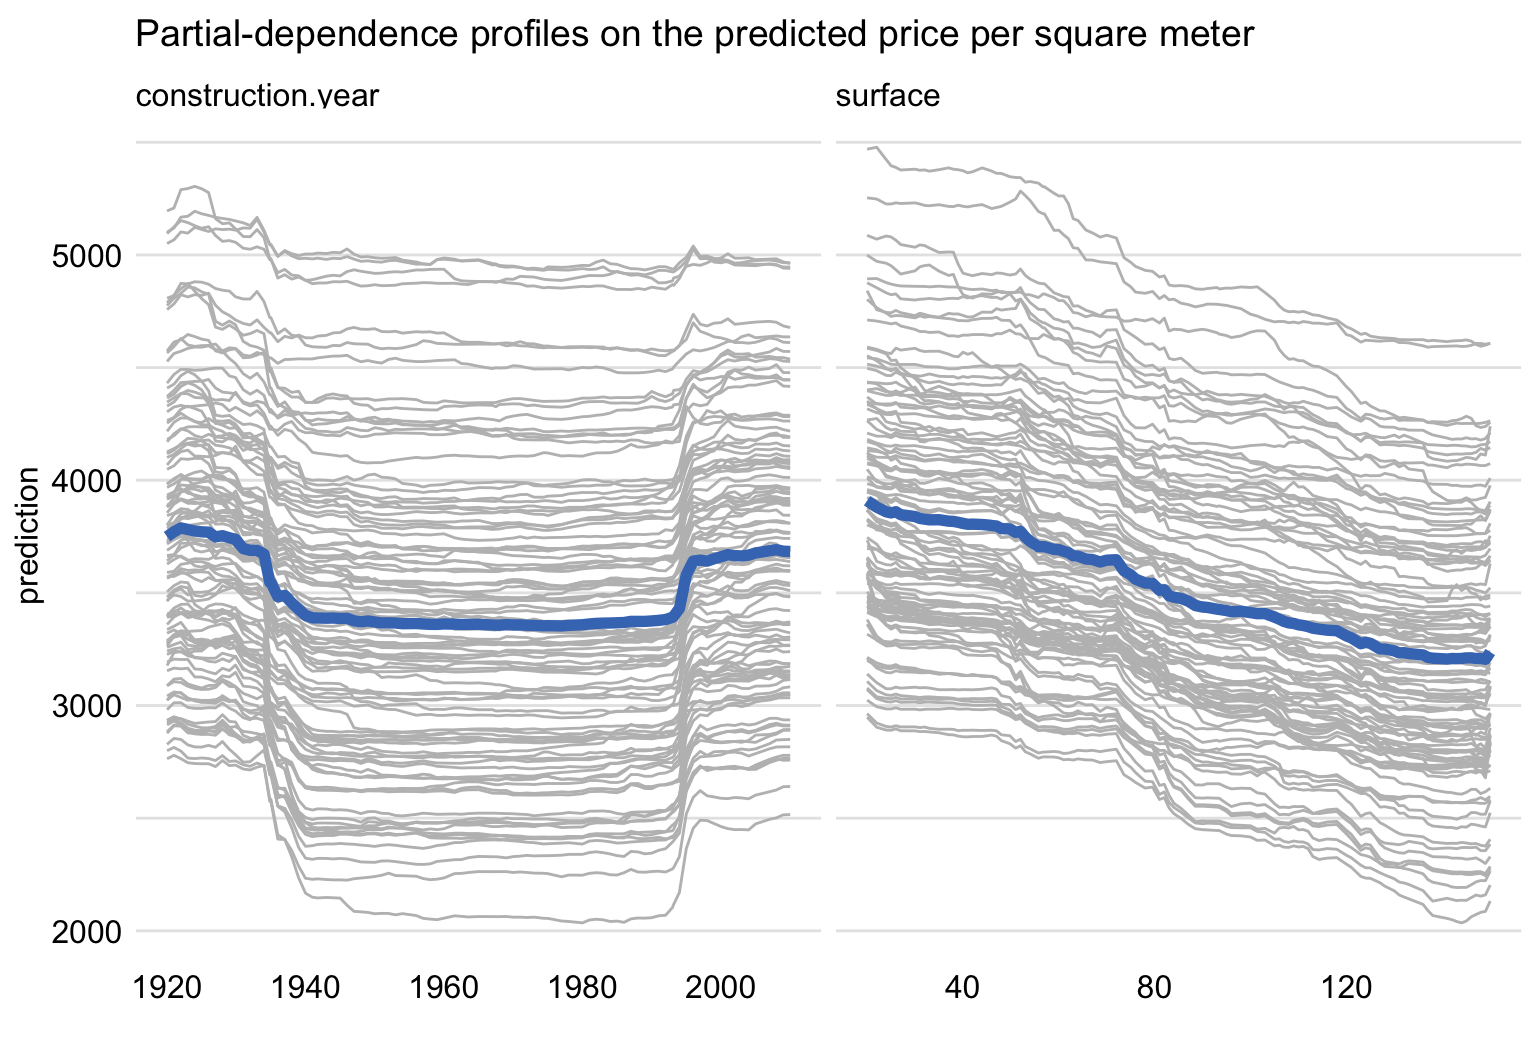 Ceteris-paribus and partial-dependence profiles for construction year and surface for 100 randomly-selected apartments for the random forest model for the apartment-prices dataset.